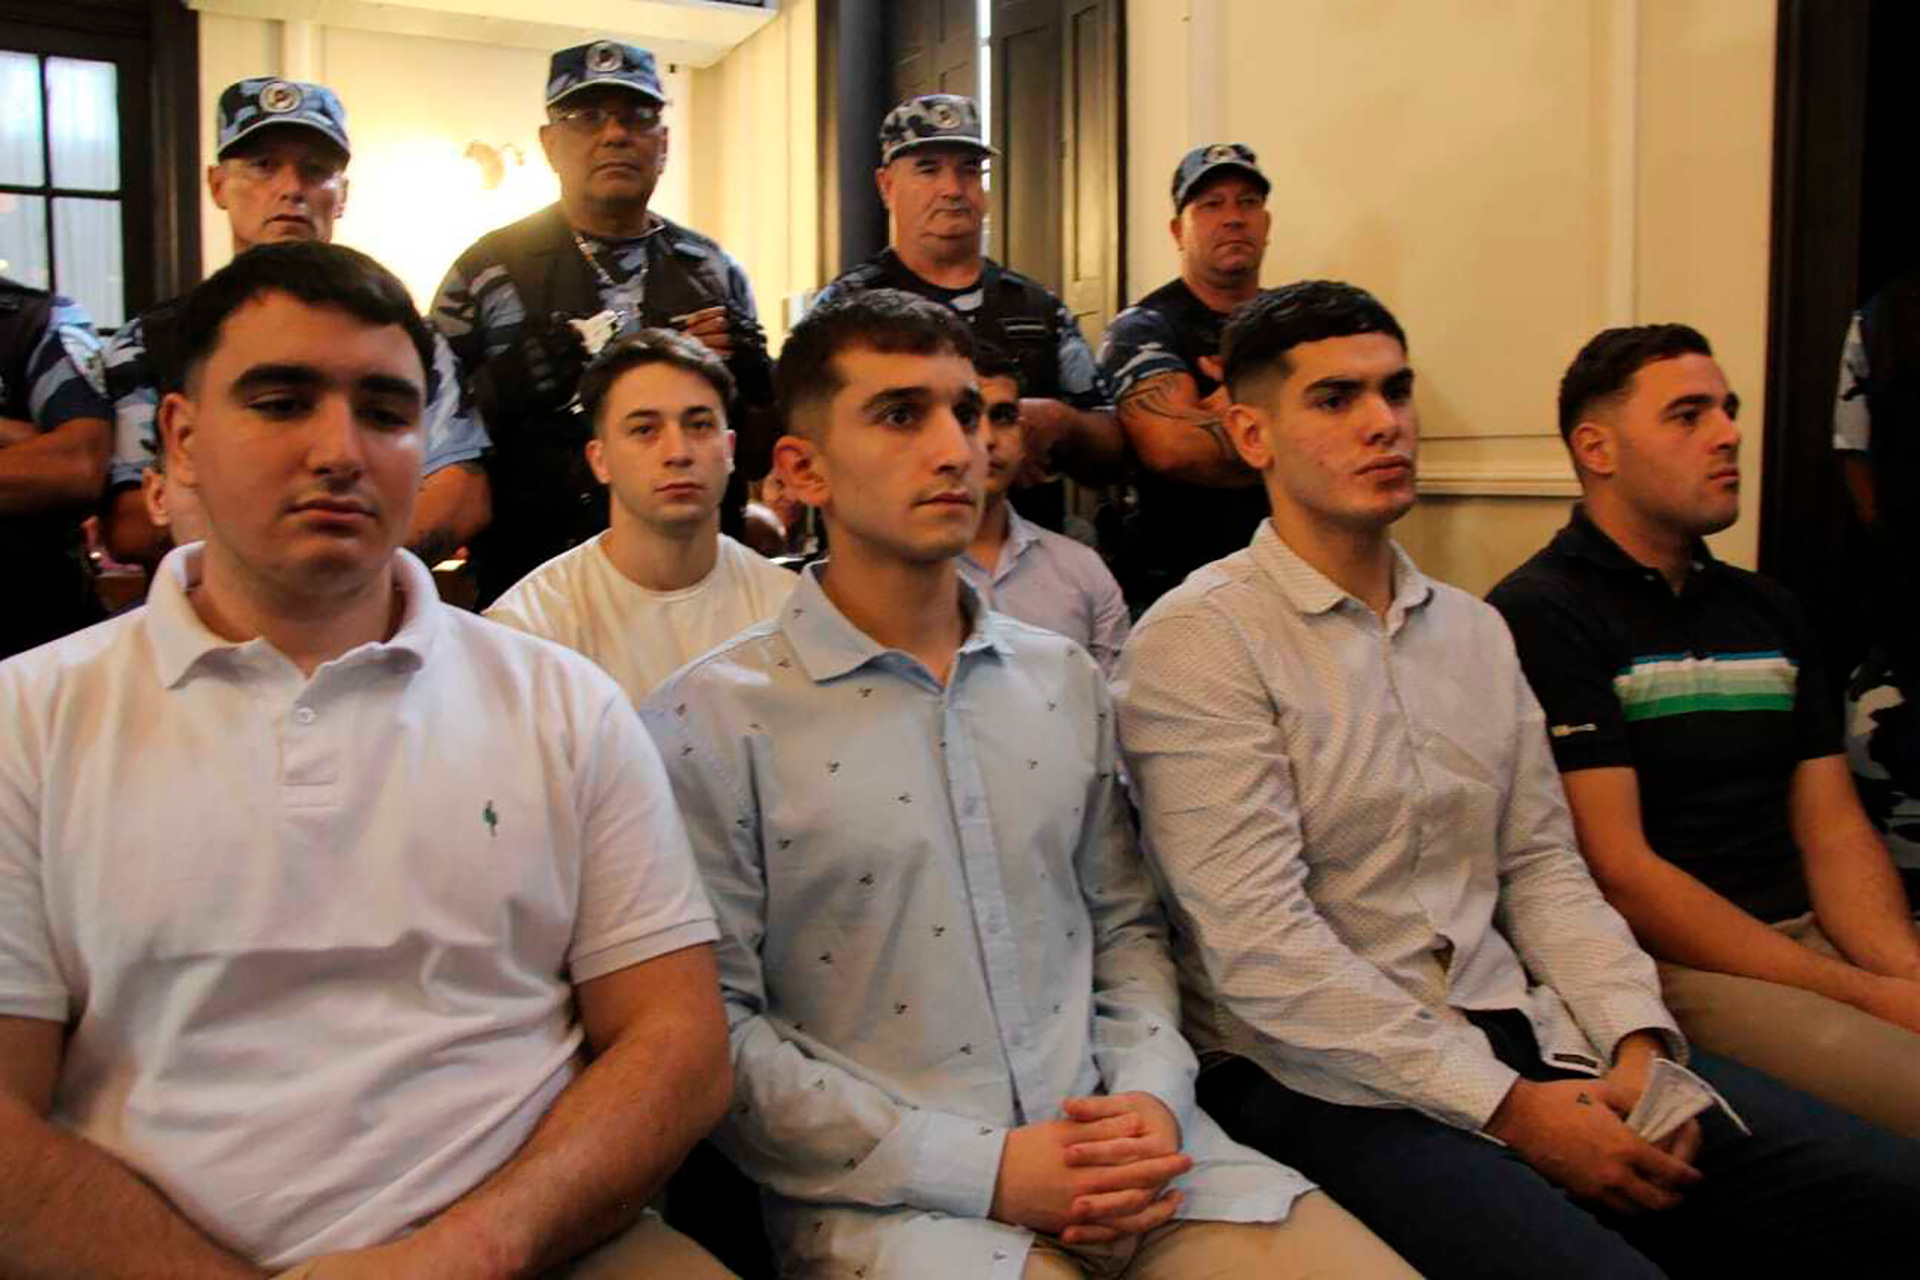 At the conclusion of the arguments, the eight defendants made use of the final words (Photo/Ezequiel Acuña)